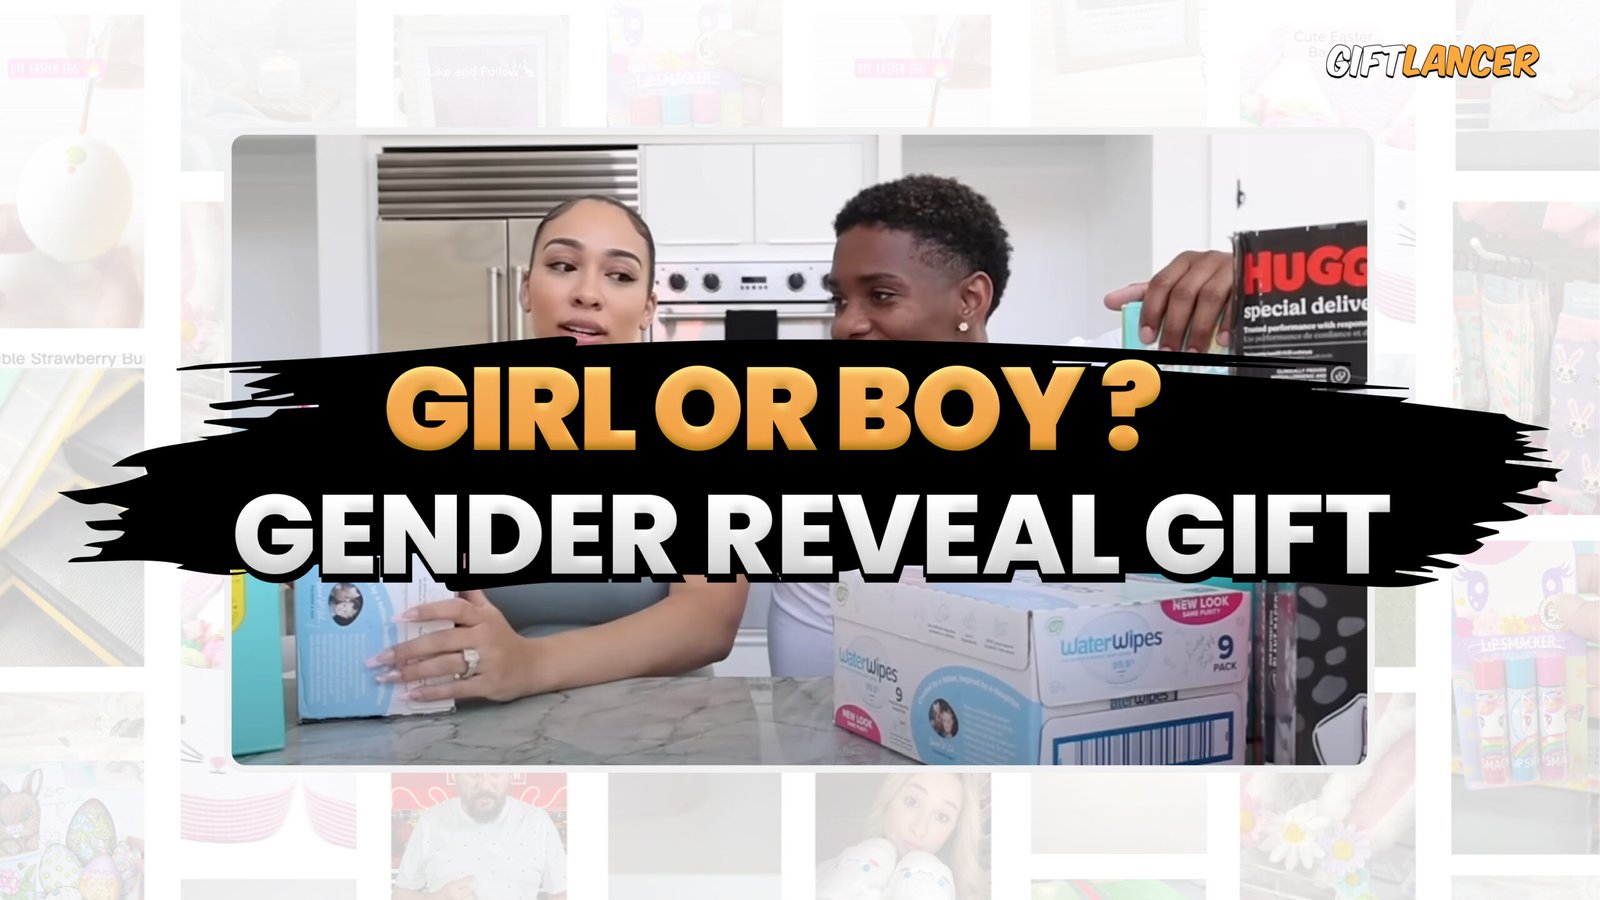 “A Mother of 2 Unveils 26 Must-Have Gender Reveal Gifts – No. 4 Tops the List”